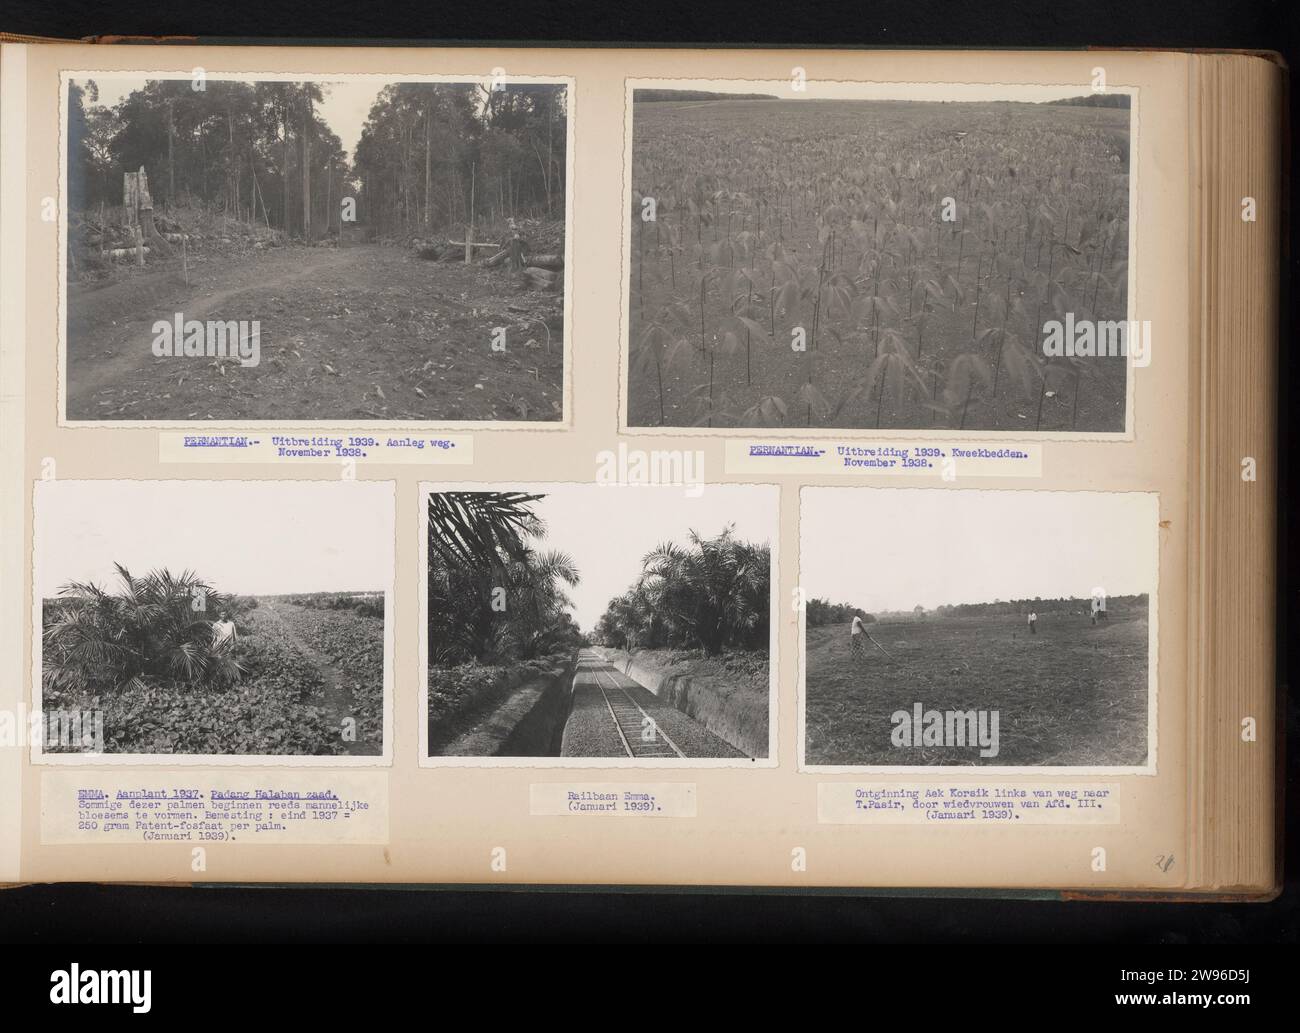 Expansion on Pernantian, Emma and AEK Korsik, 1938-1939, Anonymous, 1938 - 1939 photograph Leaf with four photos of Boskap, extraction and breeding beds on Pernantian, planting and railway on Emma and extraction by 'Wiedvrouwen' on AEK Korsik, 1938-1939. With labels with captions under the photos. Part of the photo album about the Pernantian and Brussels plantations of the Sumatra Caoutchouc Maatschappij on the east coast of Sumatra in the years 1935-1939. Sumatra photographic support. cardboard gelatin silver print plantation. (non-fruit) products of plants or trees: palm oil. (non-fruit) pro Stock Photo